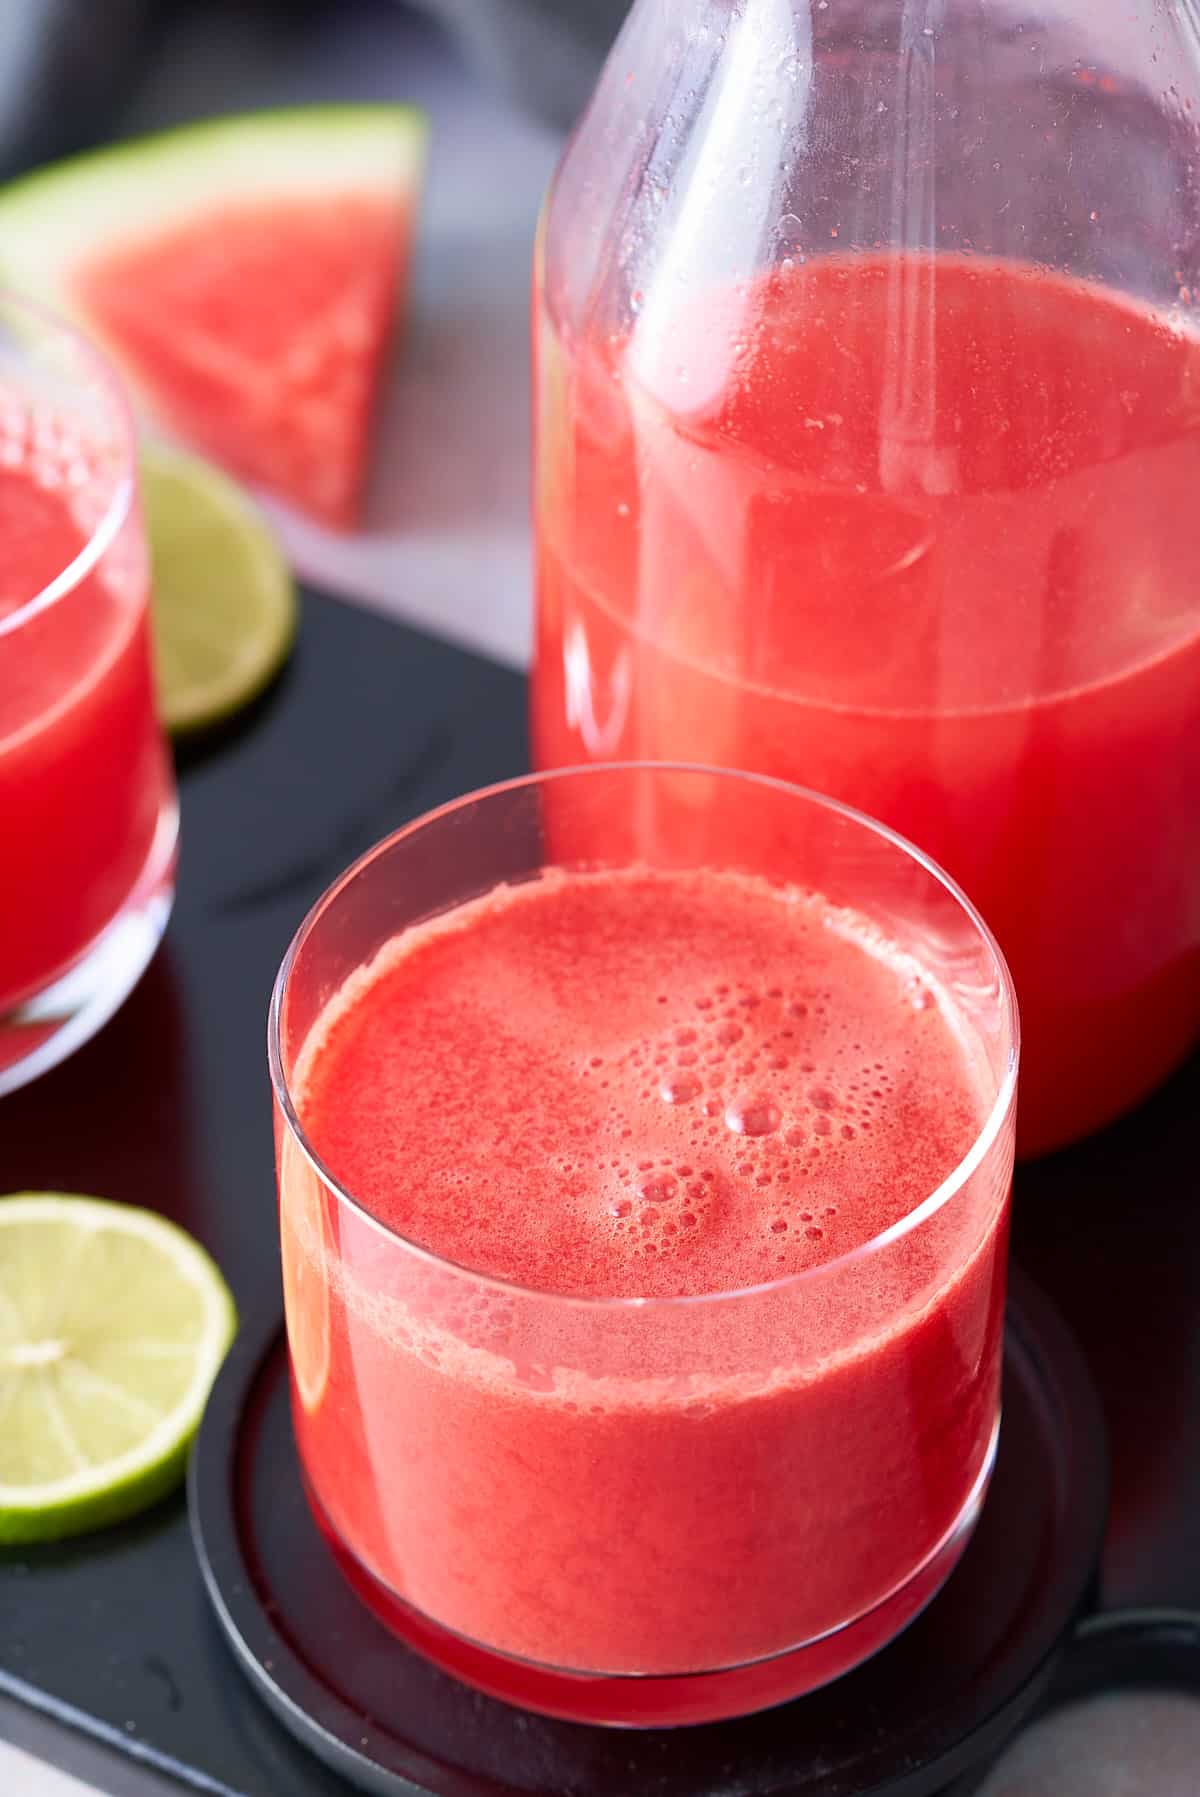 A glass filled with watermelon juice with a jug of watermelon juice, wedges of fresh watermelon and slices of lime set alongside.